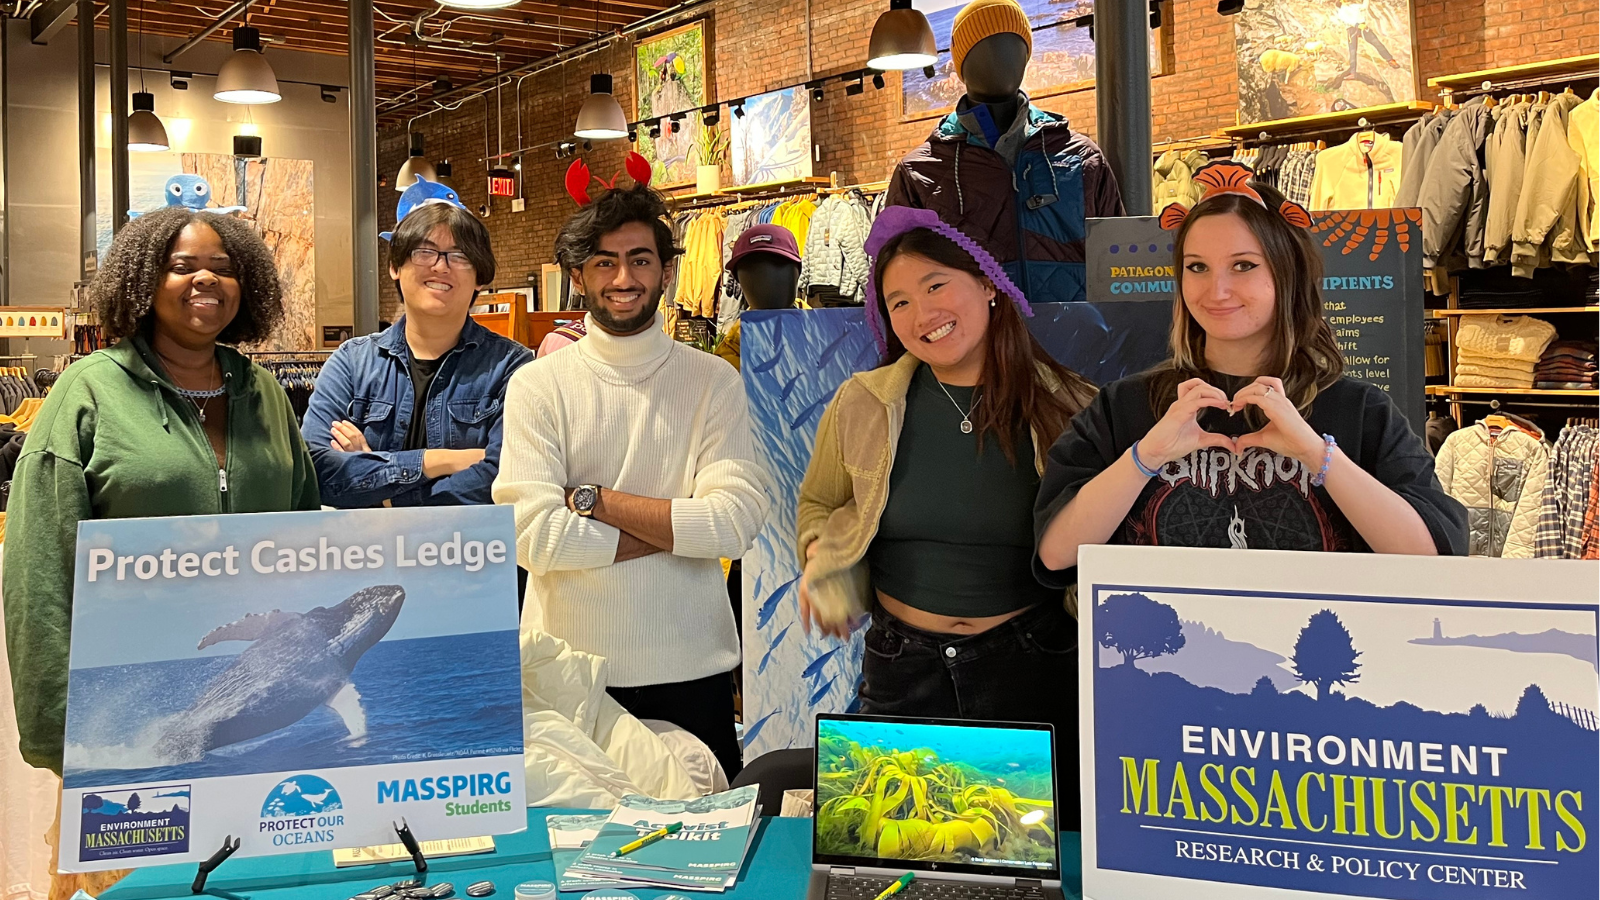 Students table at Patagonia to educate the public on the Cashes Ledge, Protect our Oceans campaign.